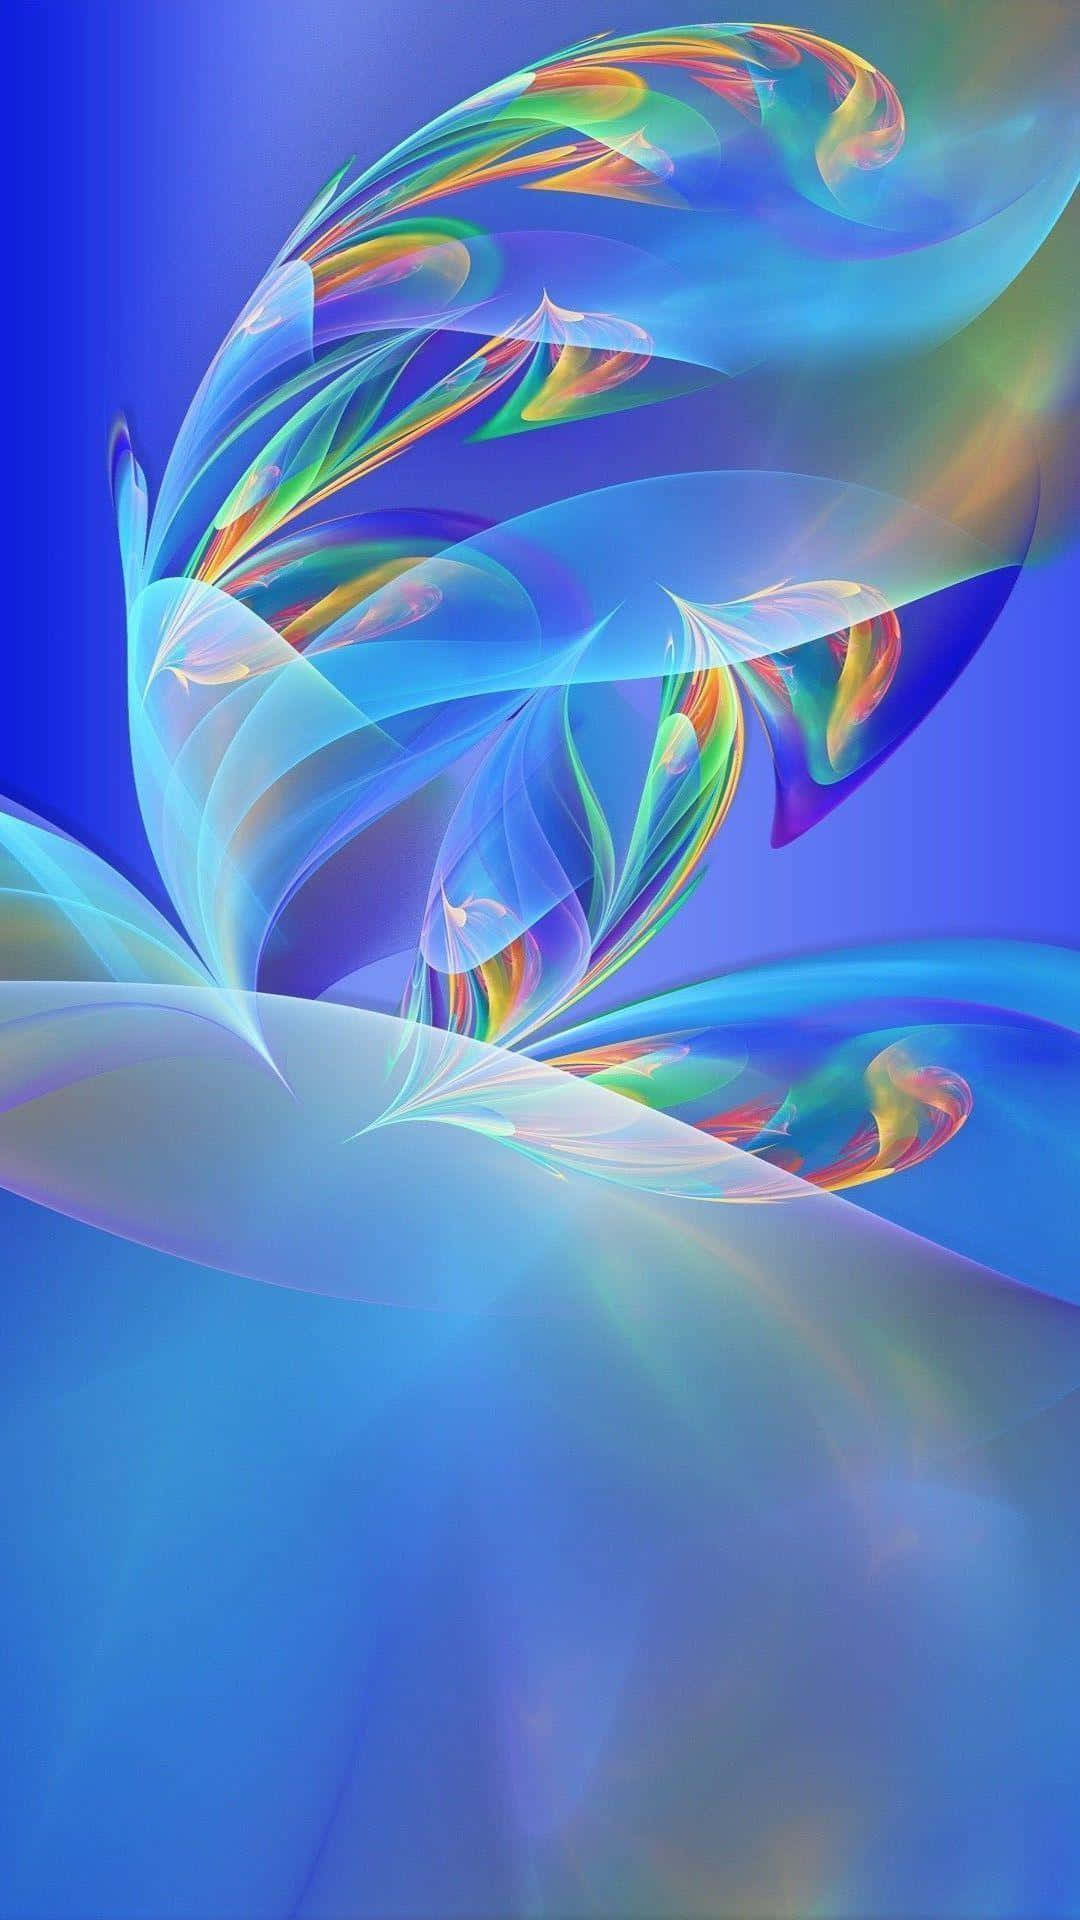 A Blue Abstract Painting With Colorful Swirls